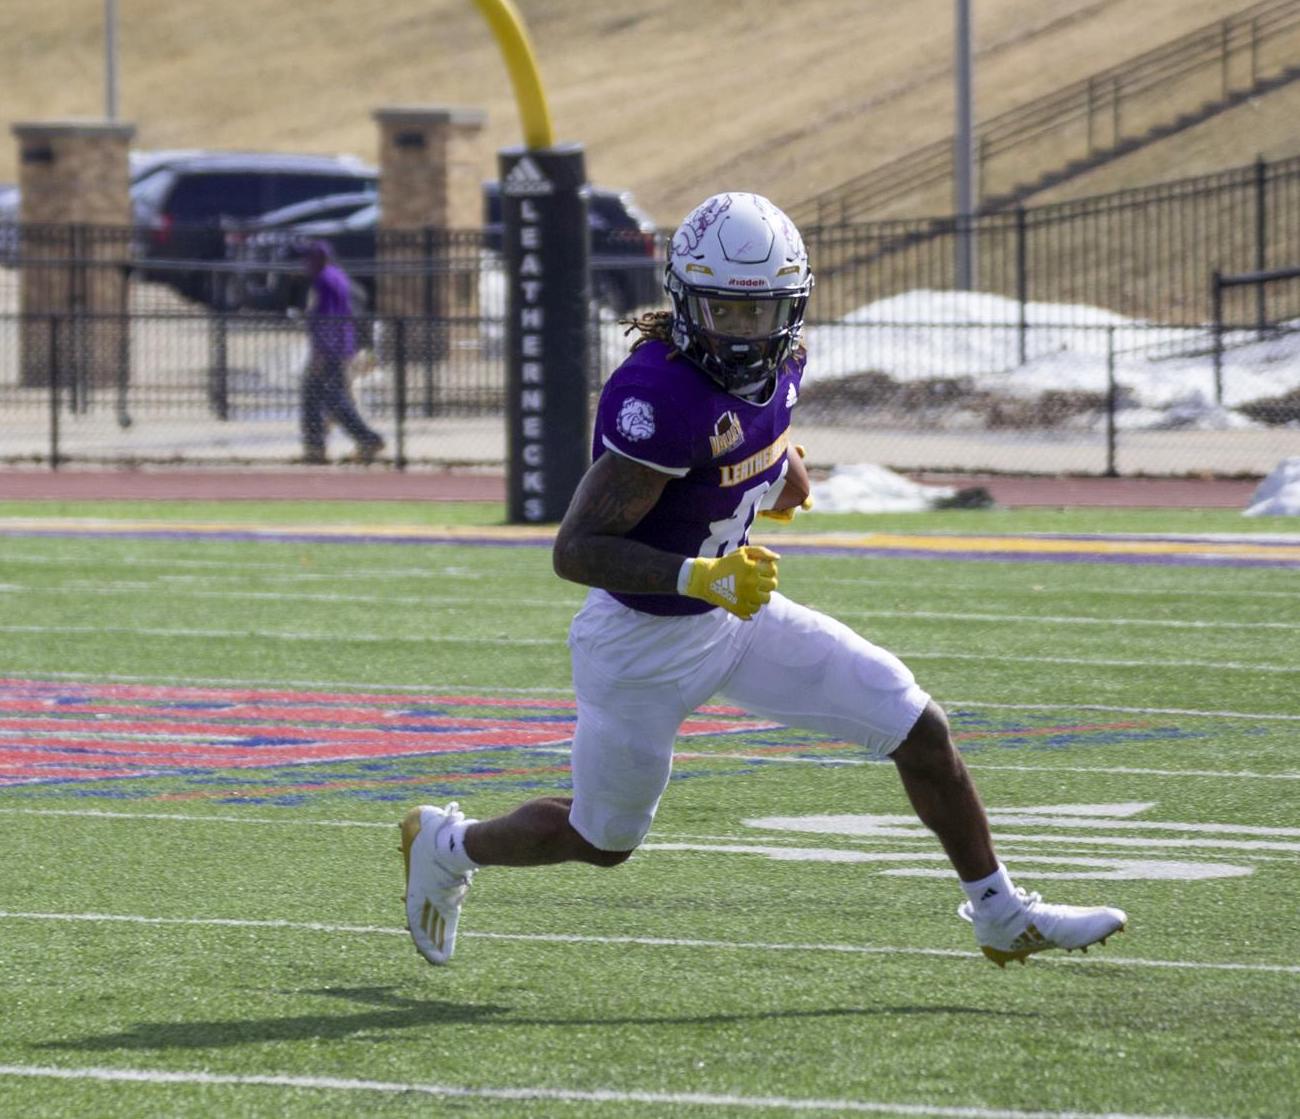 Recruiting: Former Western Illinois WR Dallas Daniels Taking Official Visit on Illini Campus